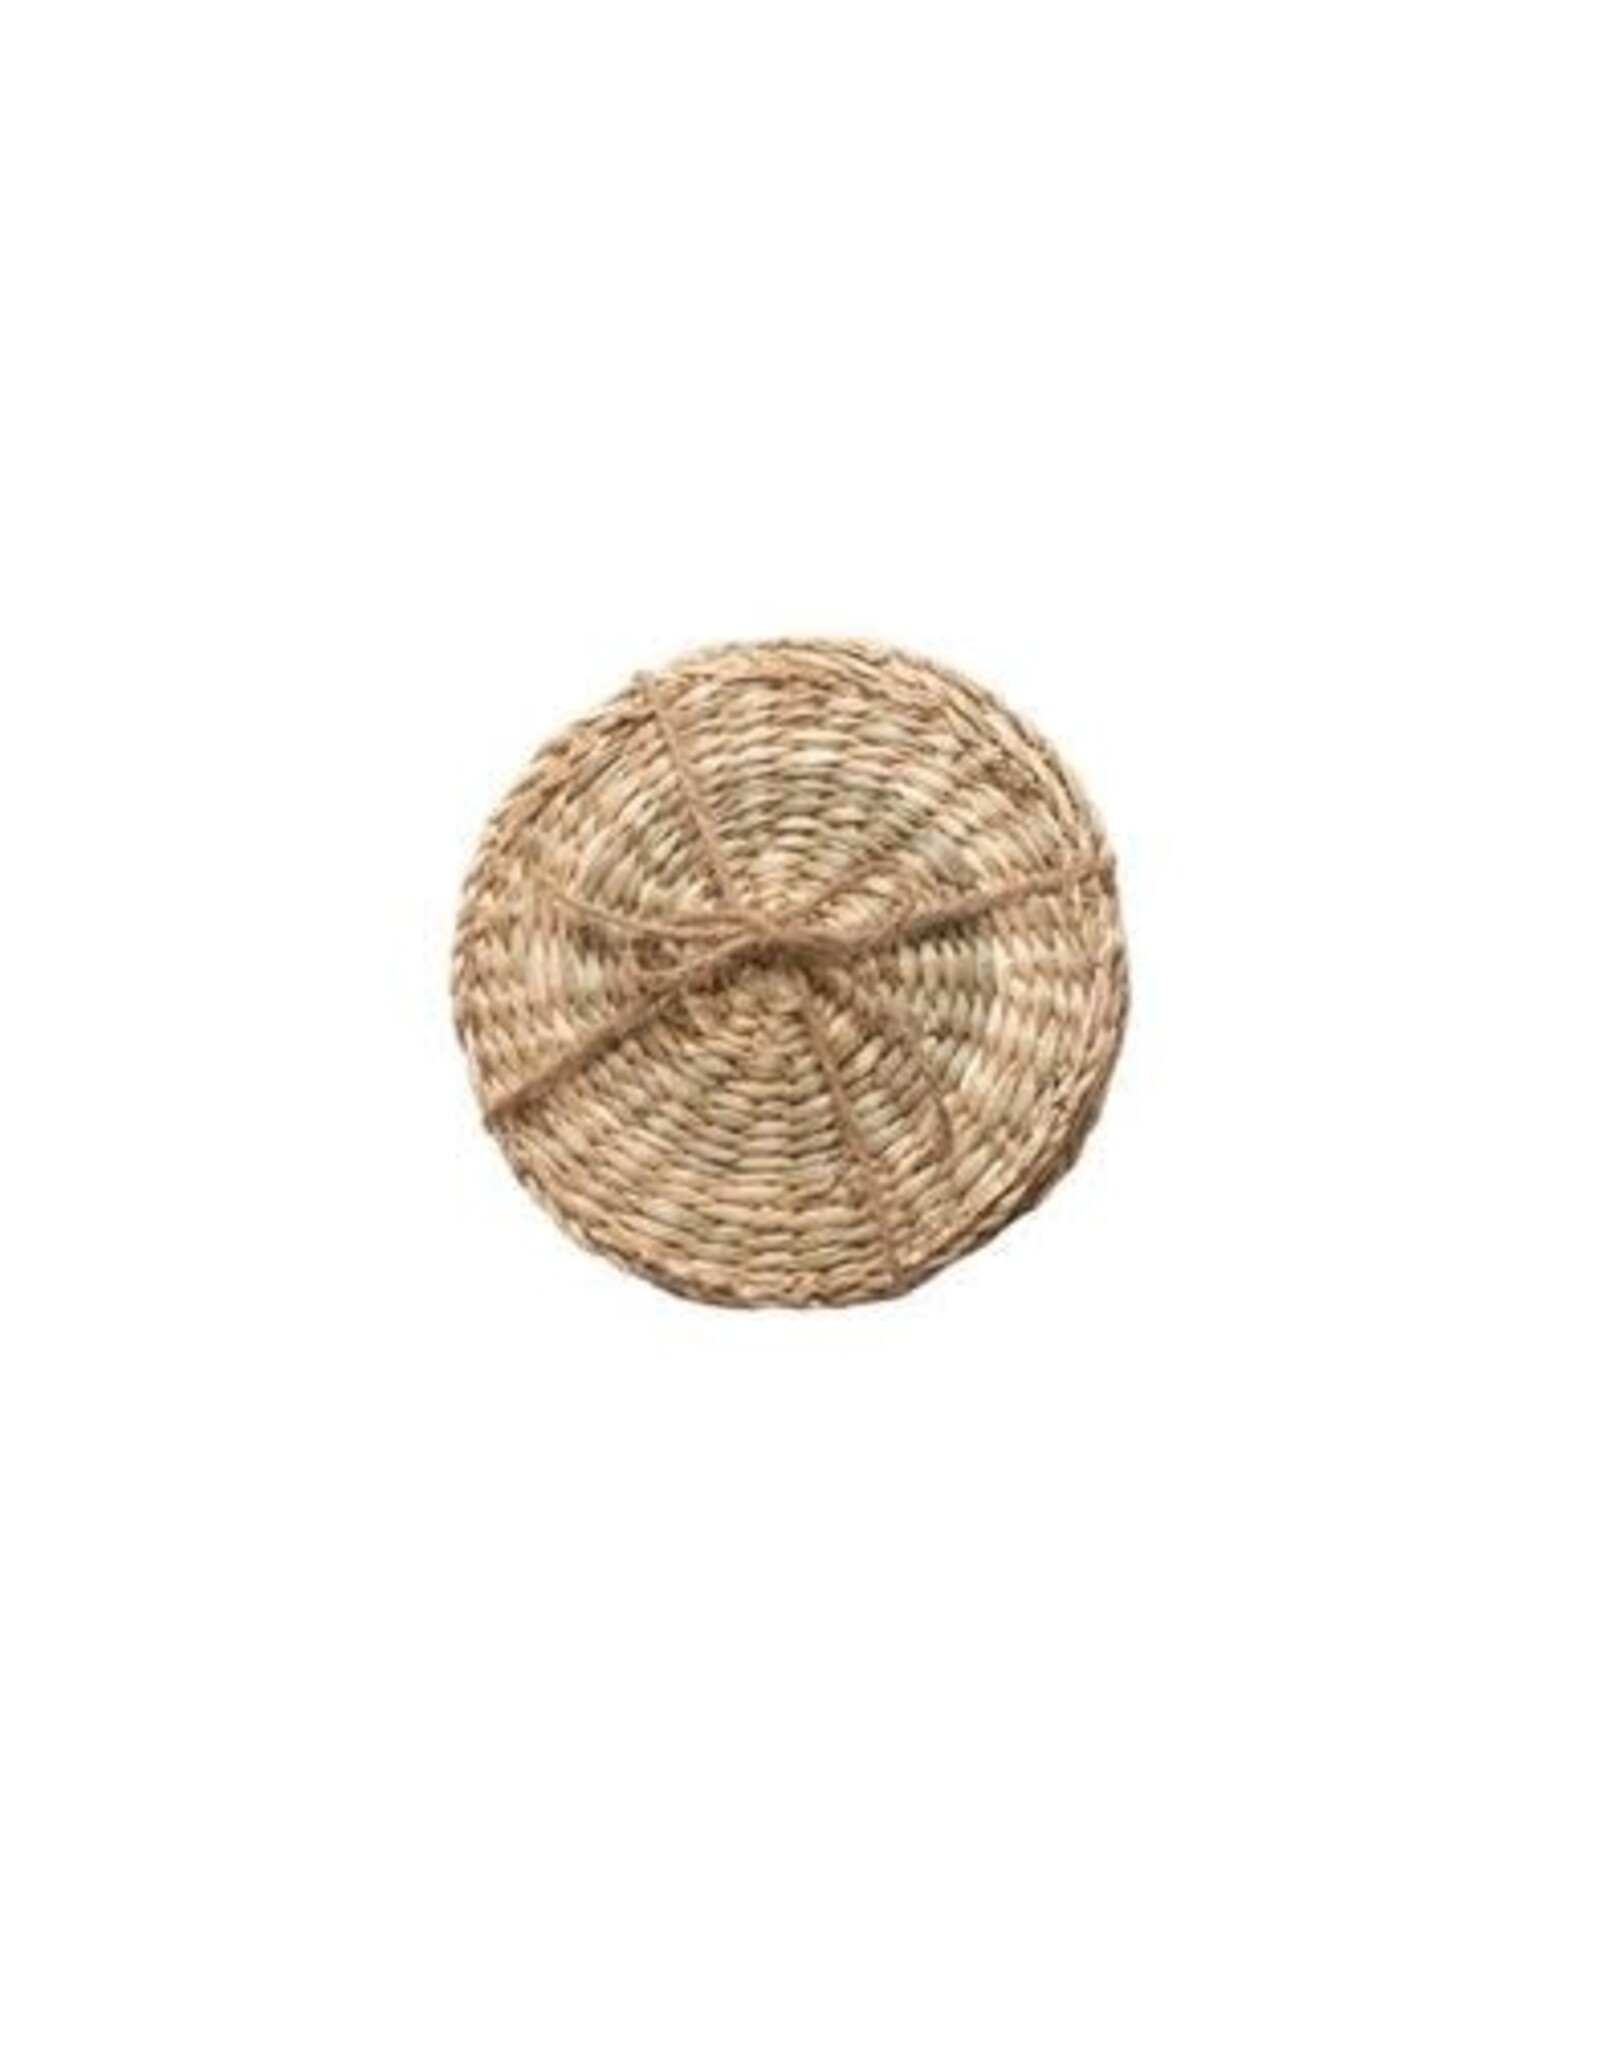 Seagrass Coasters - Set of 4